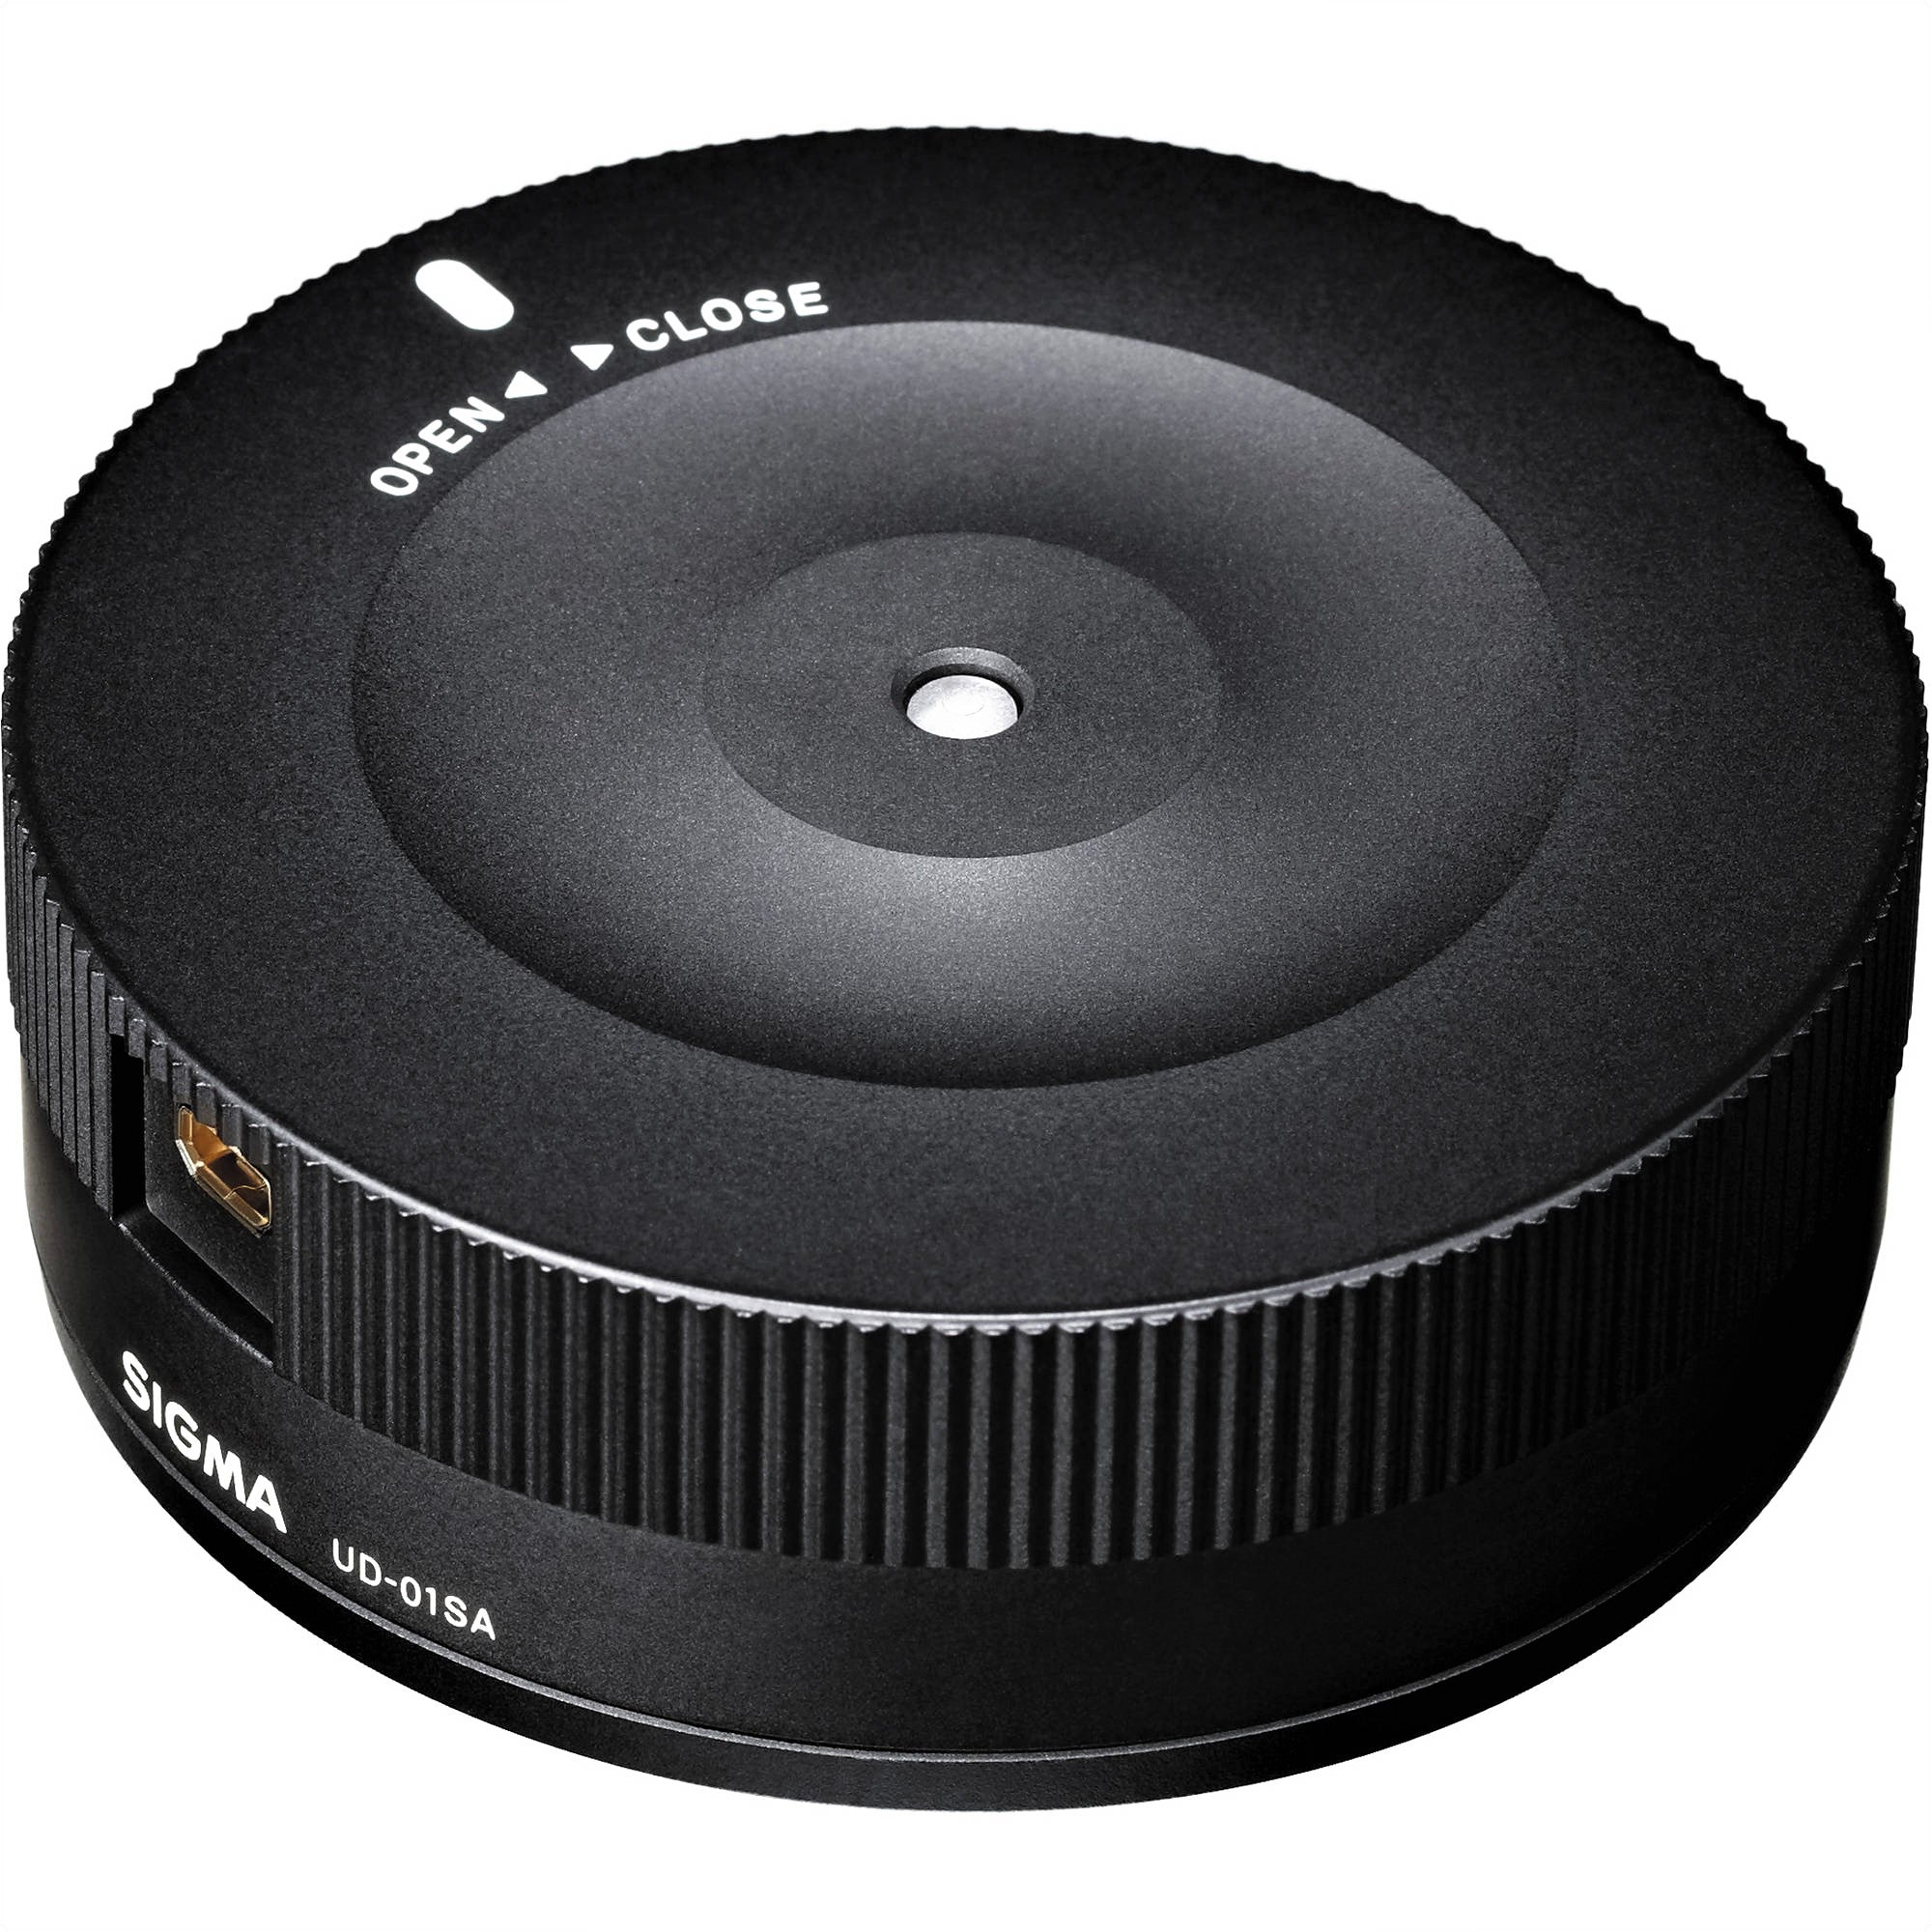 Sigma USB Dock for Sony A Mount Lenses